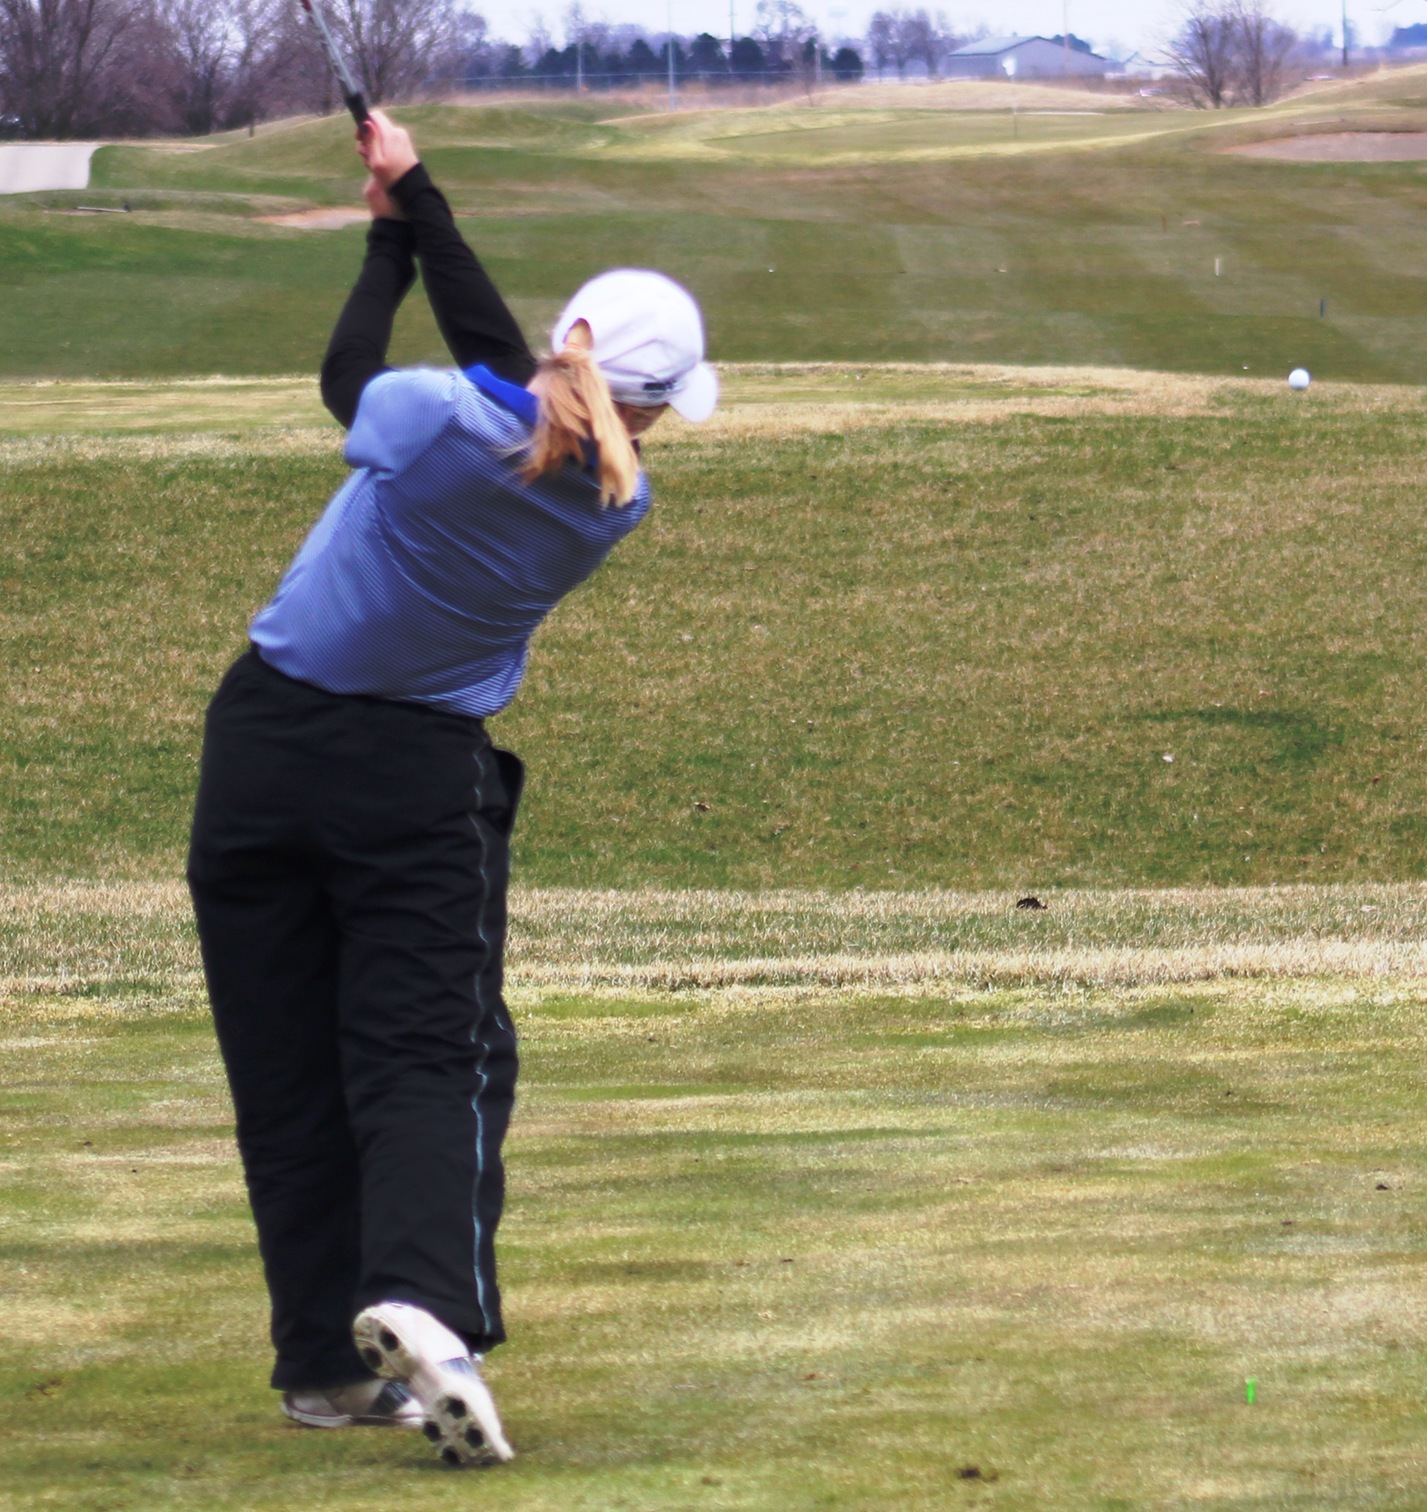 NIACC's Courtney Tusler tees off during the first round of the regional golf tournament last Friday in Ankeny.